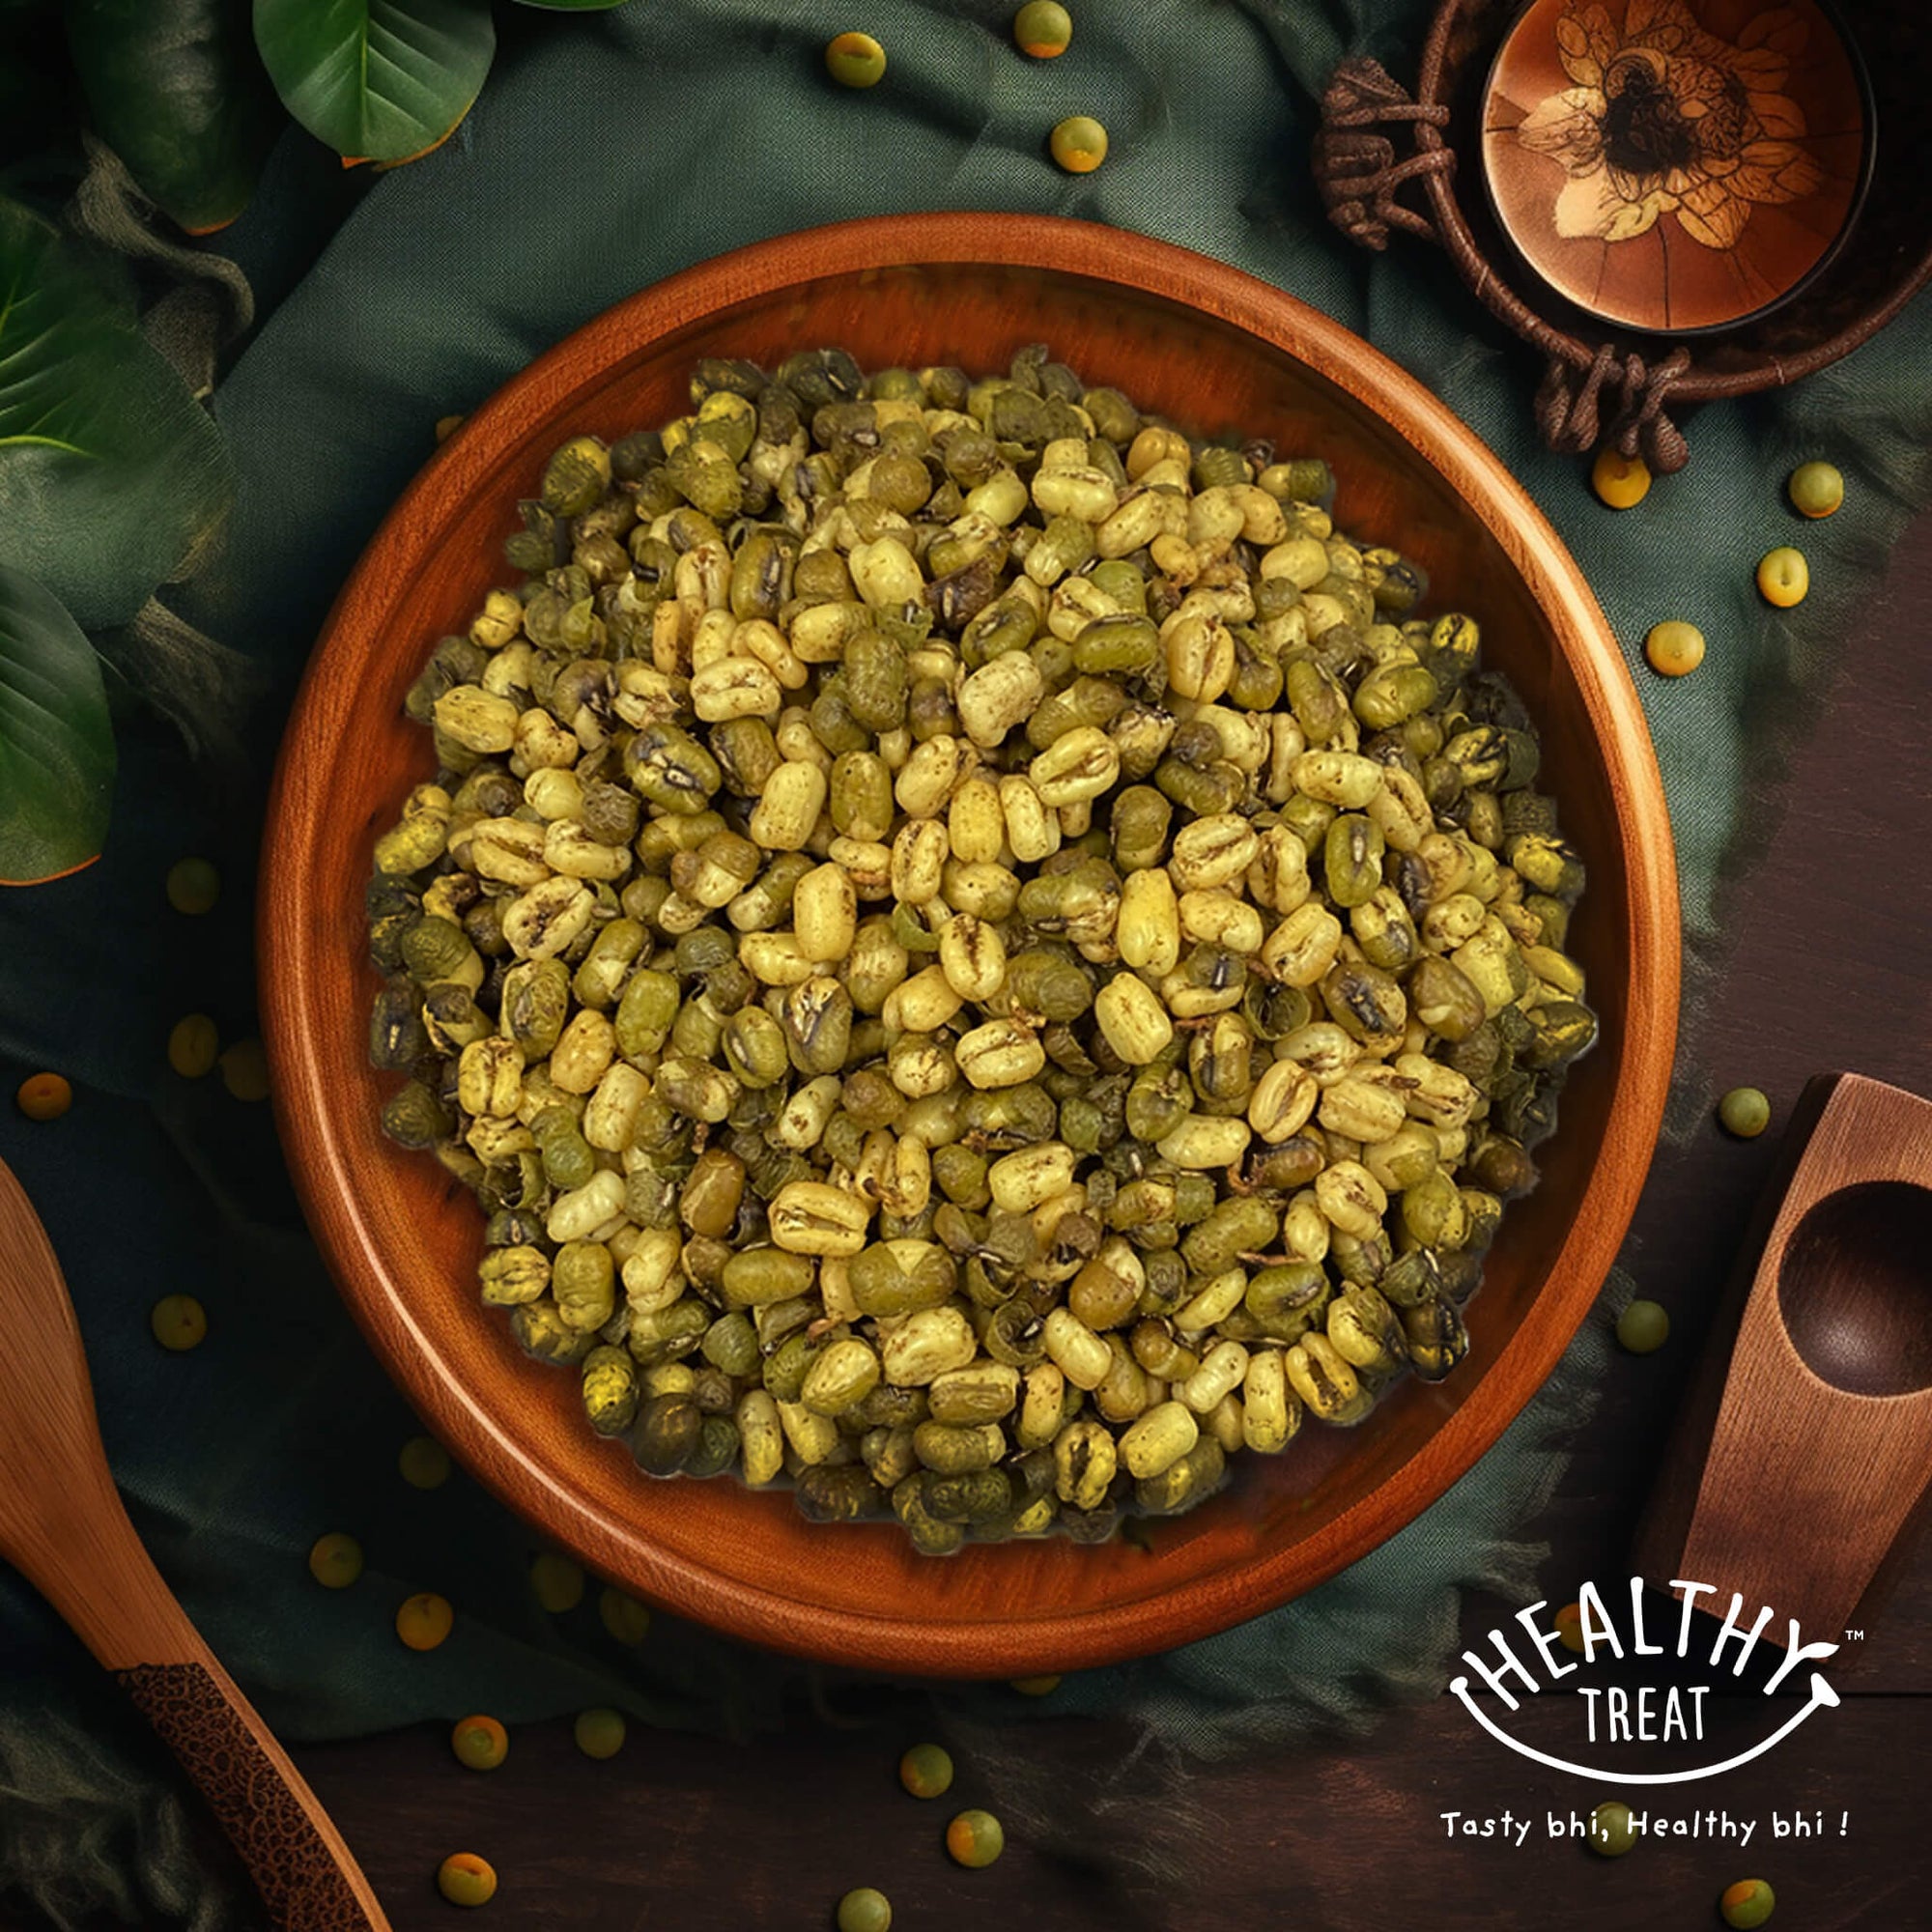 Healthy Treat 100% Roasted Solid Moong or mung bean is a protein rich snack, a savoury crunchy namkeen which is oil free and full of nutrients.